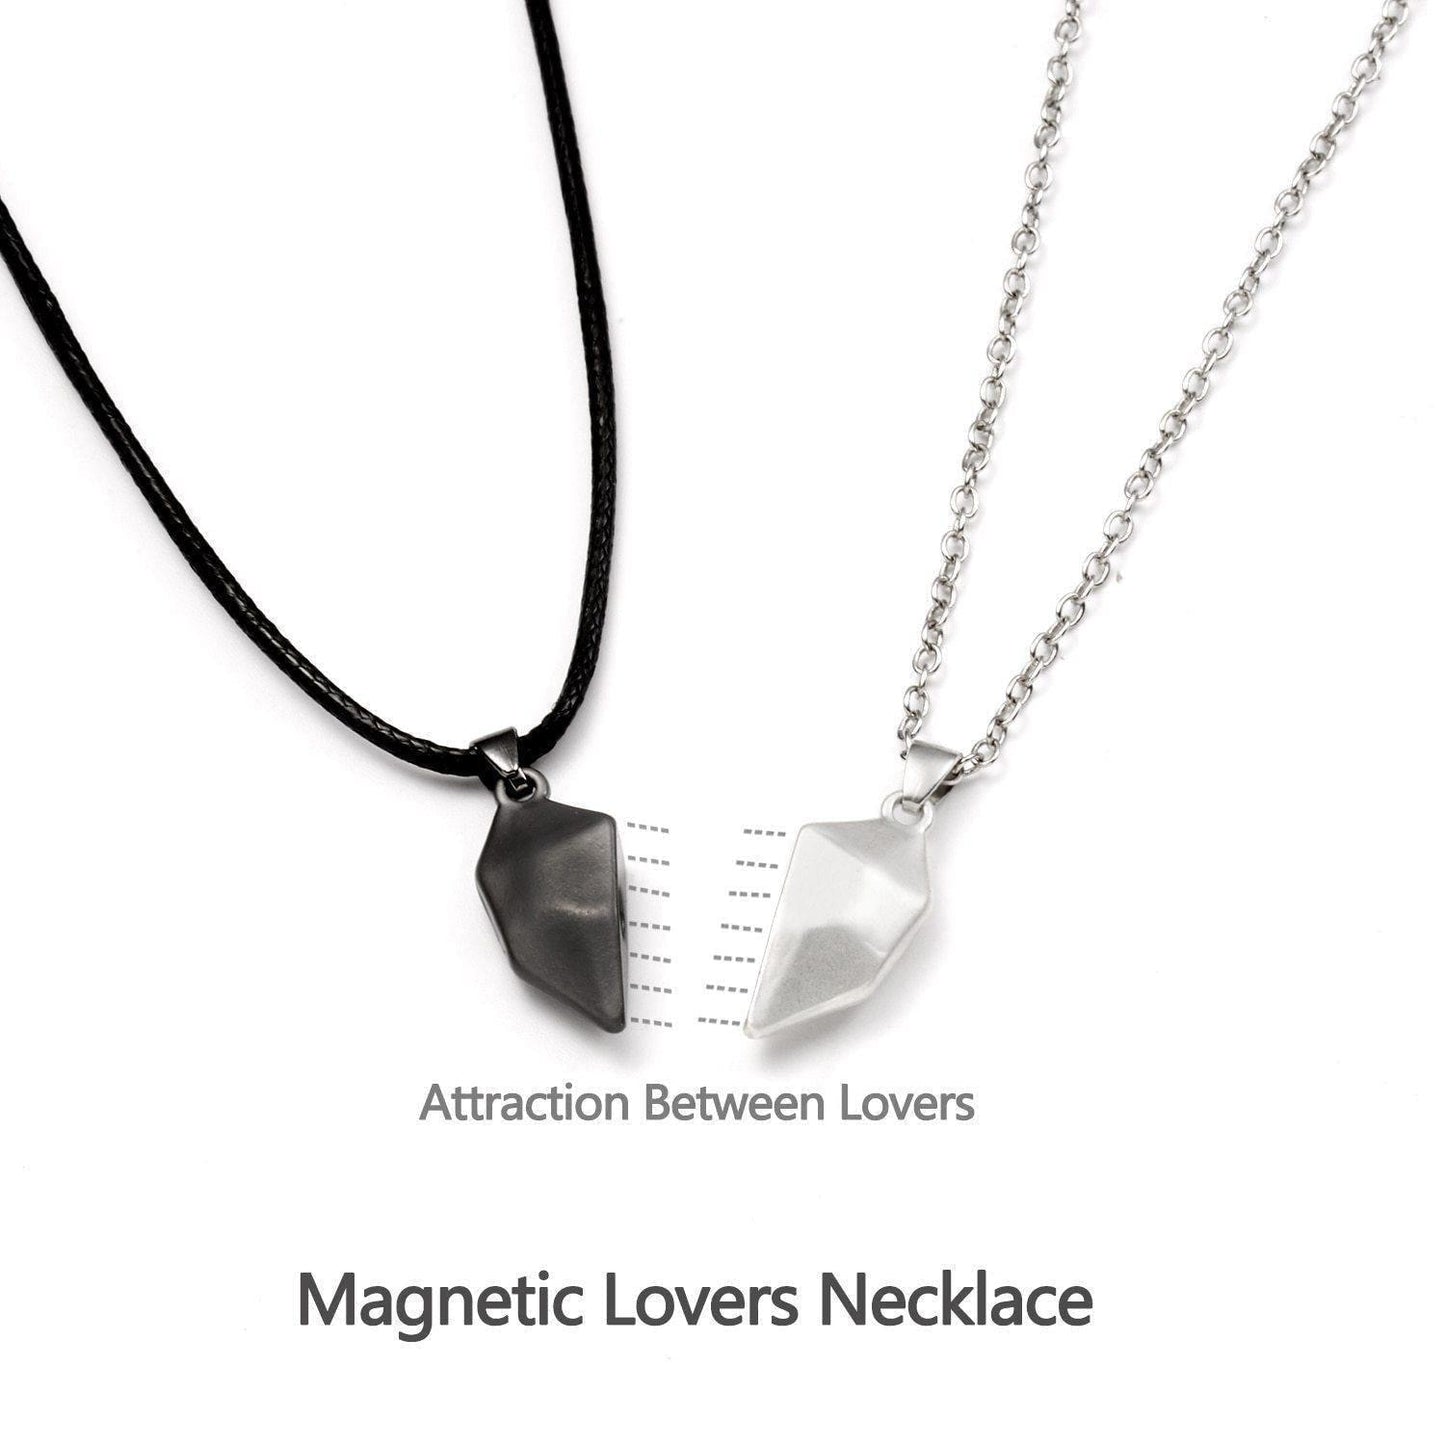 To My Girlfriend Forever Love Necklace in 2023 | To My Girlfriend Forever Love Necklace - undefined | Couple hugging pendant, Couple Necklace, Gift for Girlfriend, Girlfriend Gifts, girlfriend necklace, Magnetic Couple Necklace, to my girlfriend | From Hunny Life | hunnylife.com